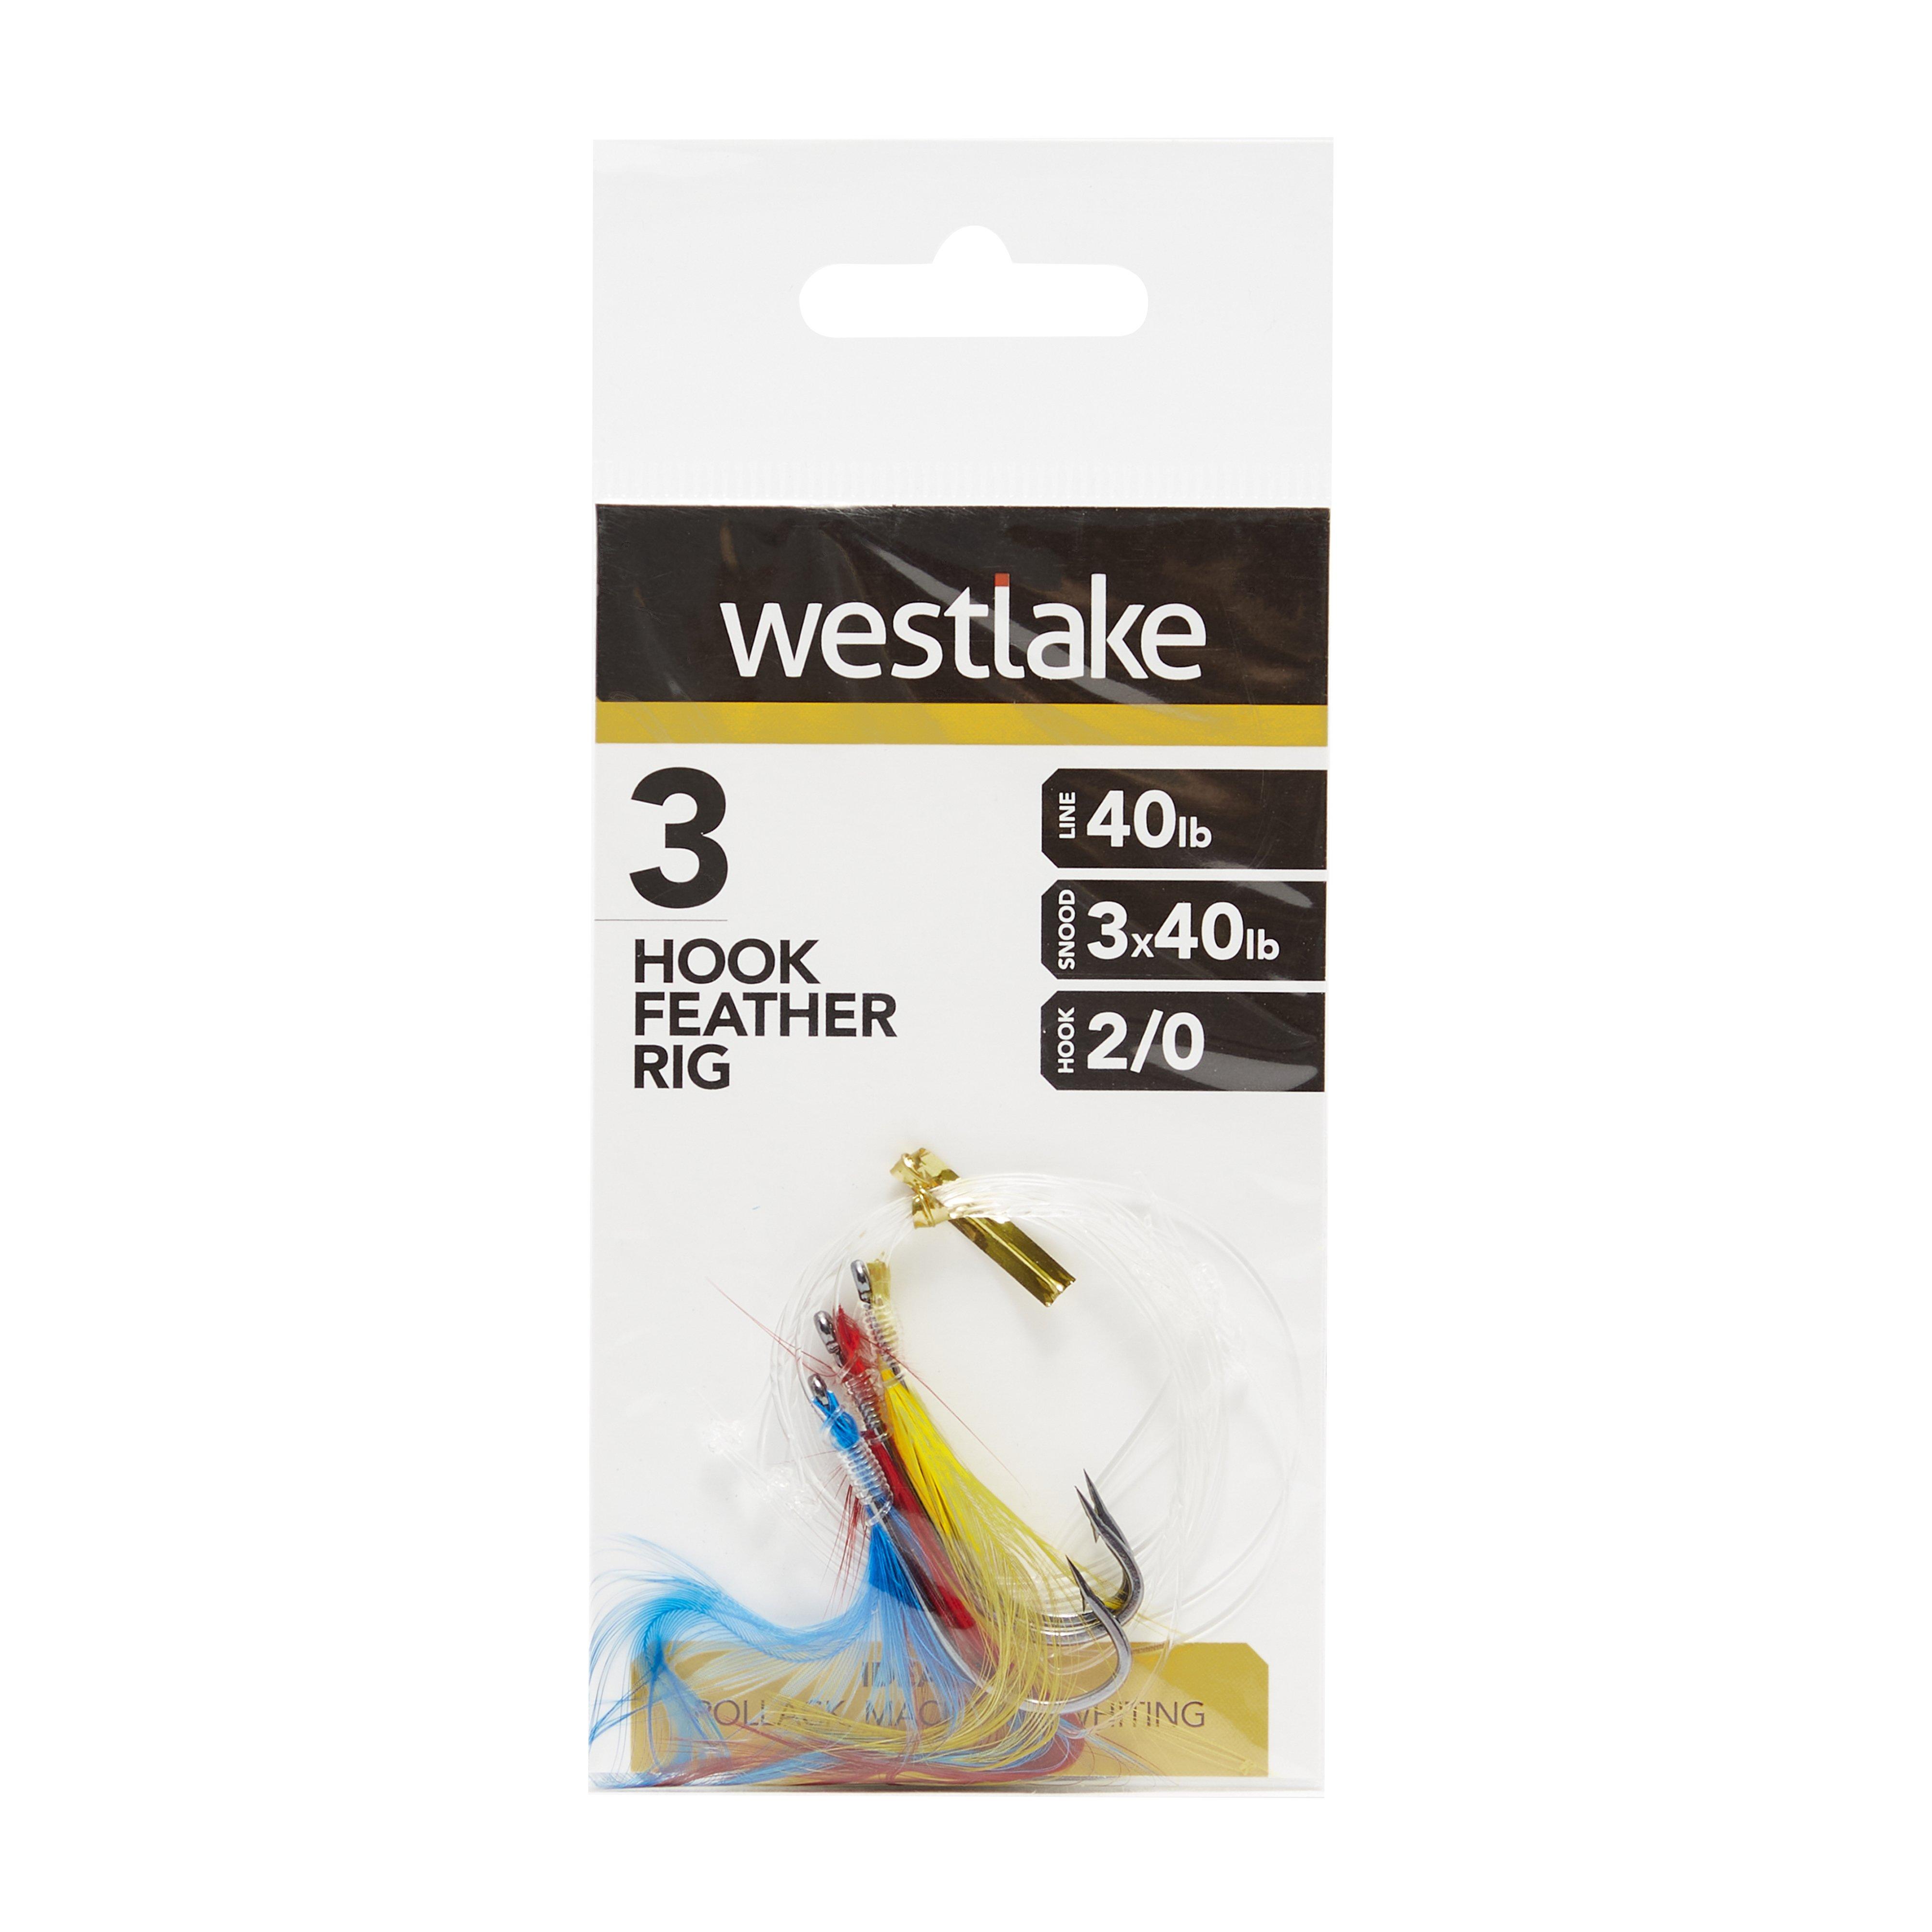 Westlake 3 Hook Feather Rig 2/0 Review